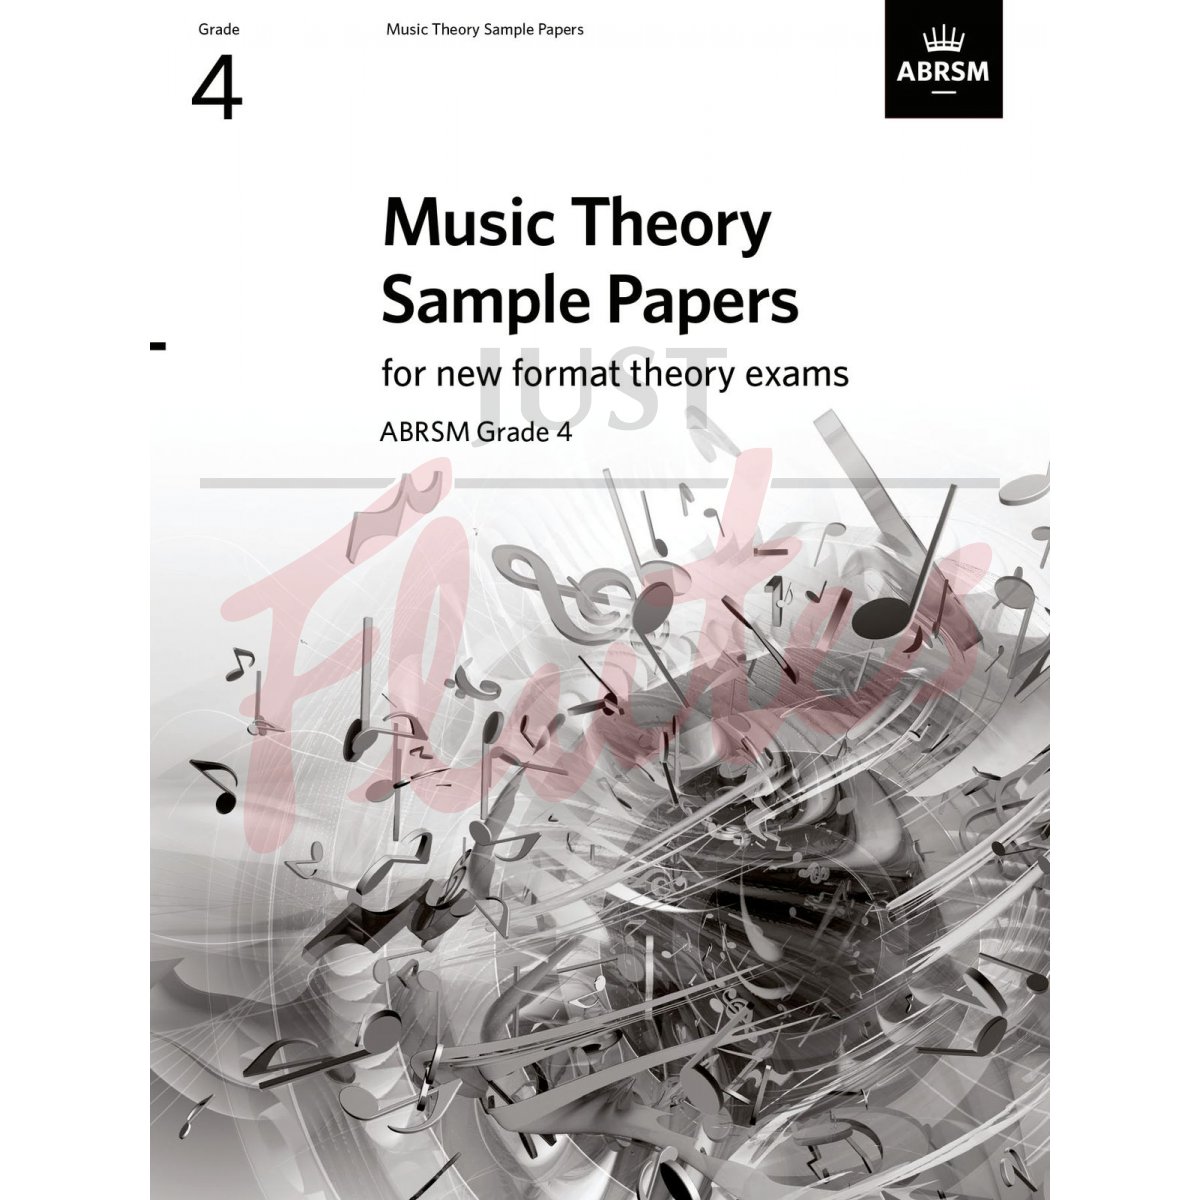 Music Theory Sample Papers Grade 4